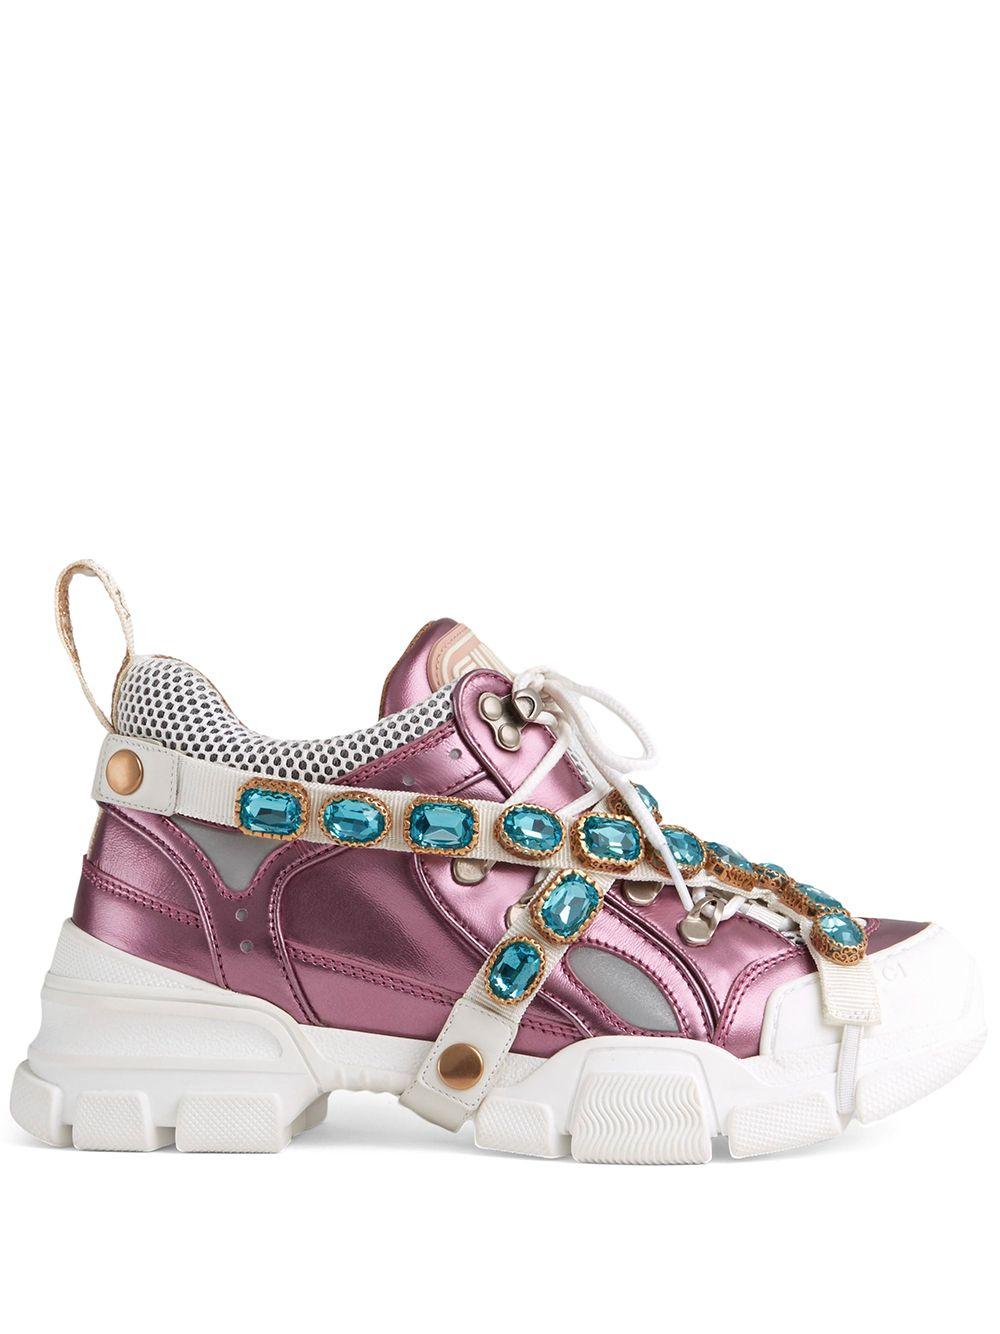 Gucci Flashtrek Sneakers With Removable Crystals in Pink | Lyst